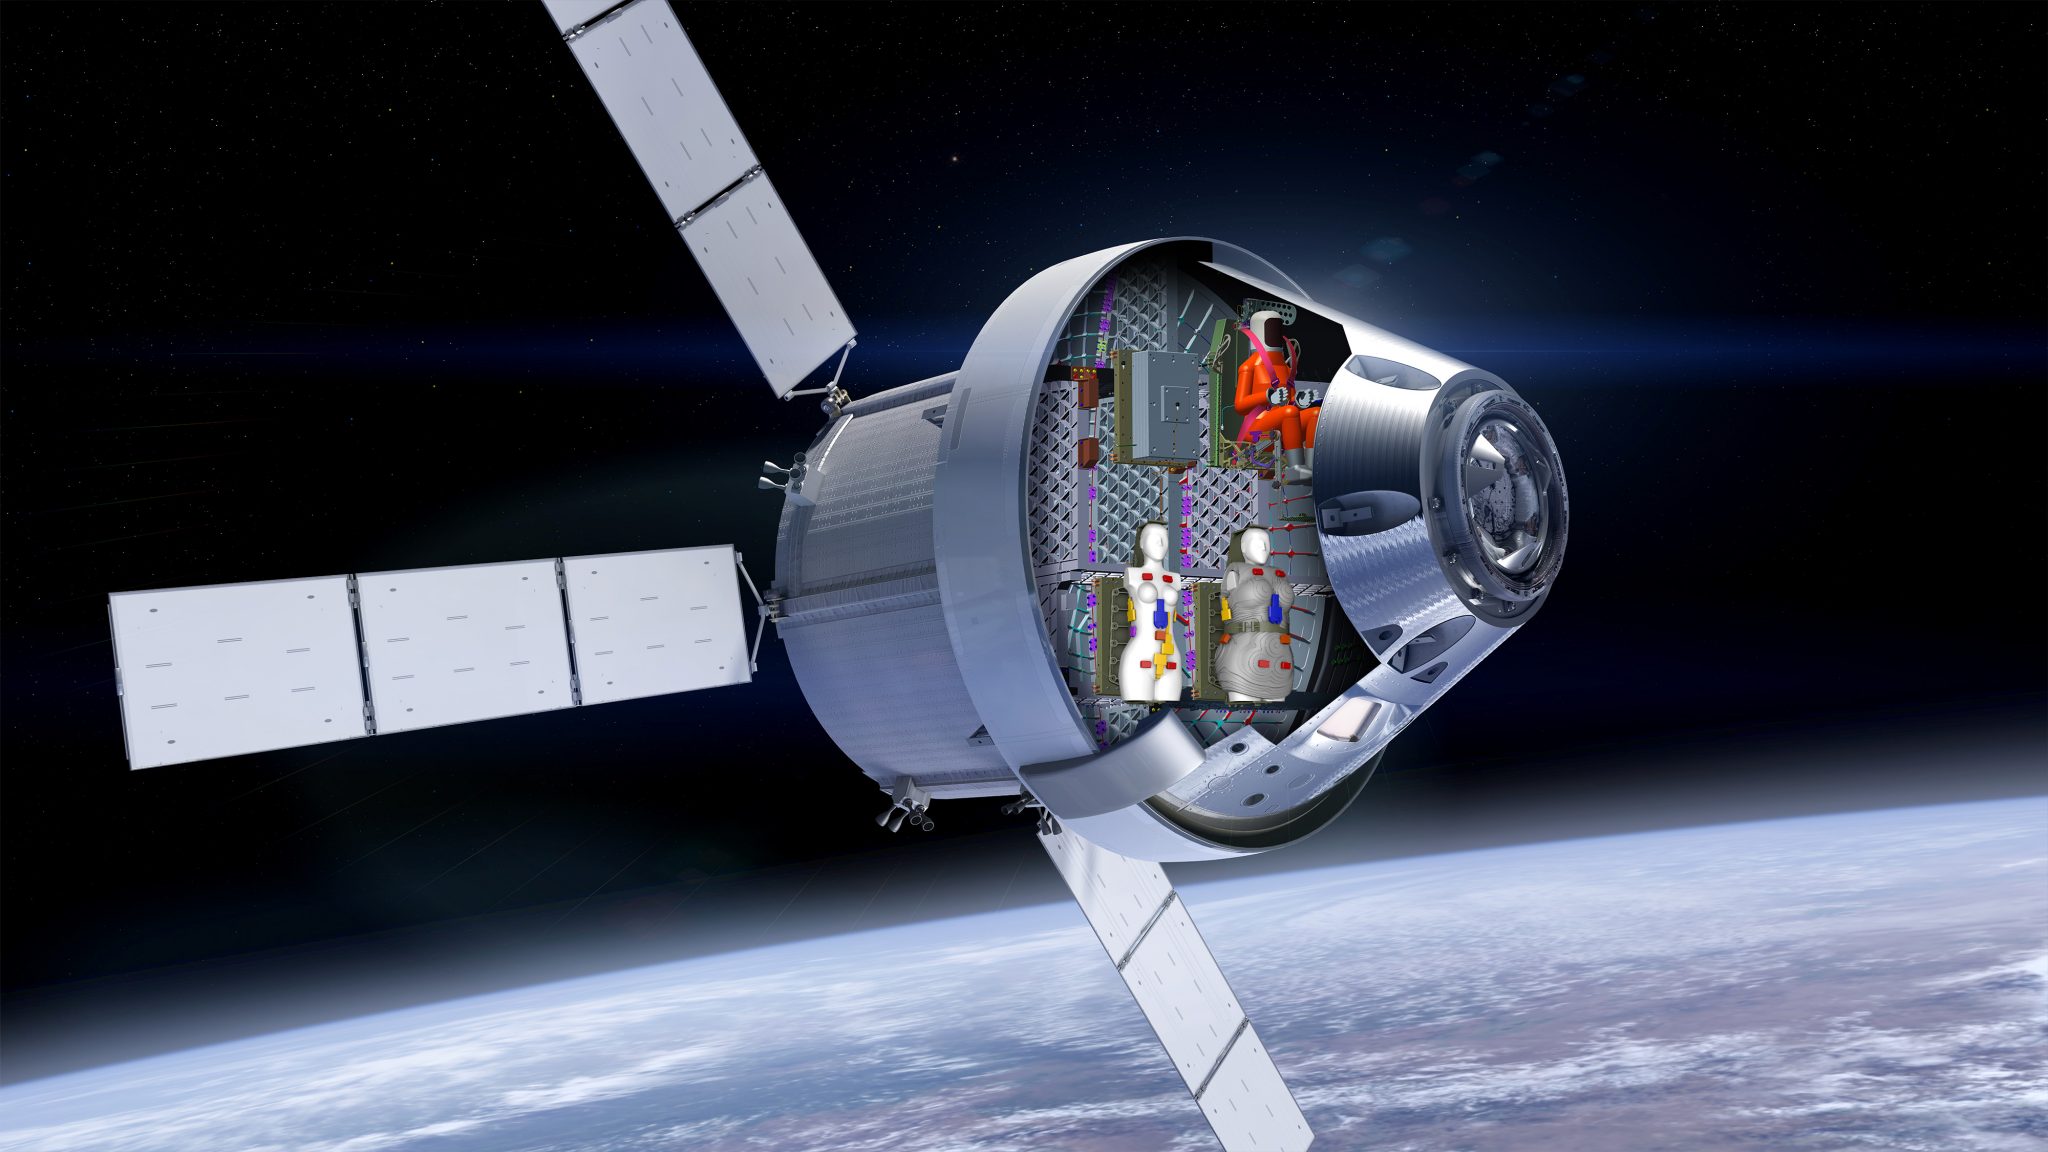 spacecraft flying in earth orbit with three mannequins shown in a cutaway